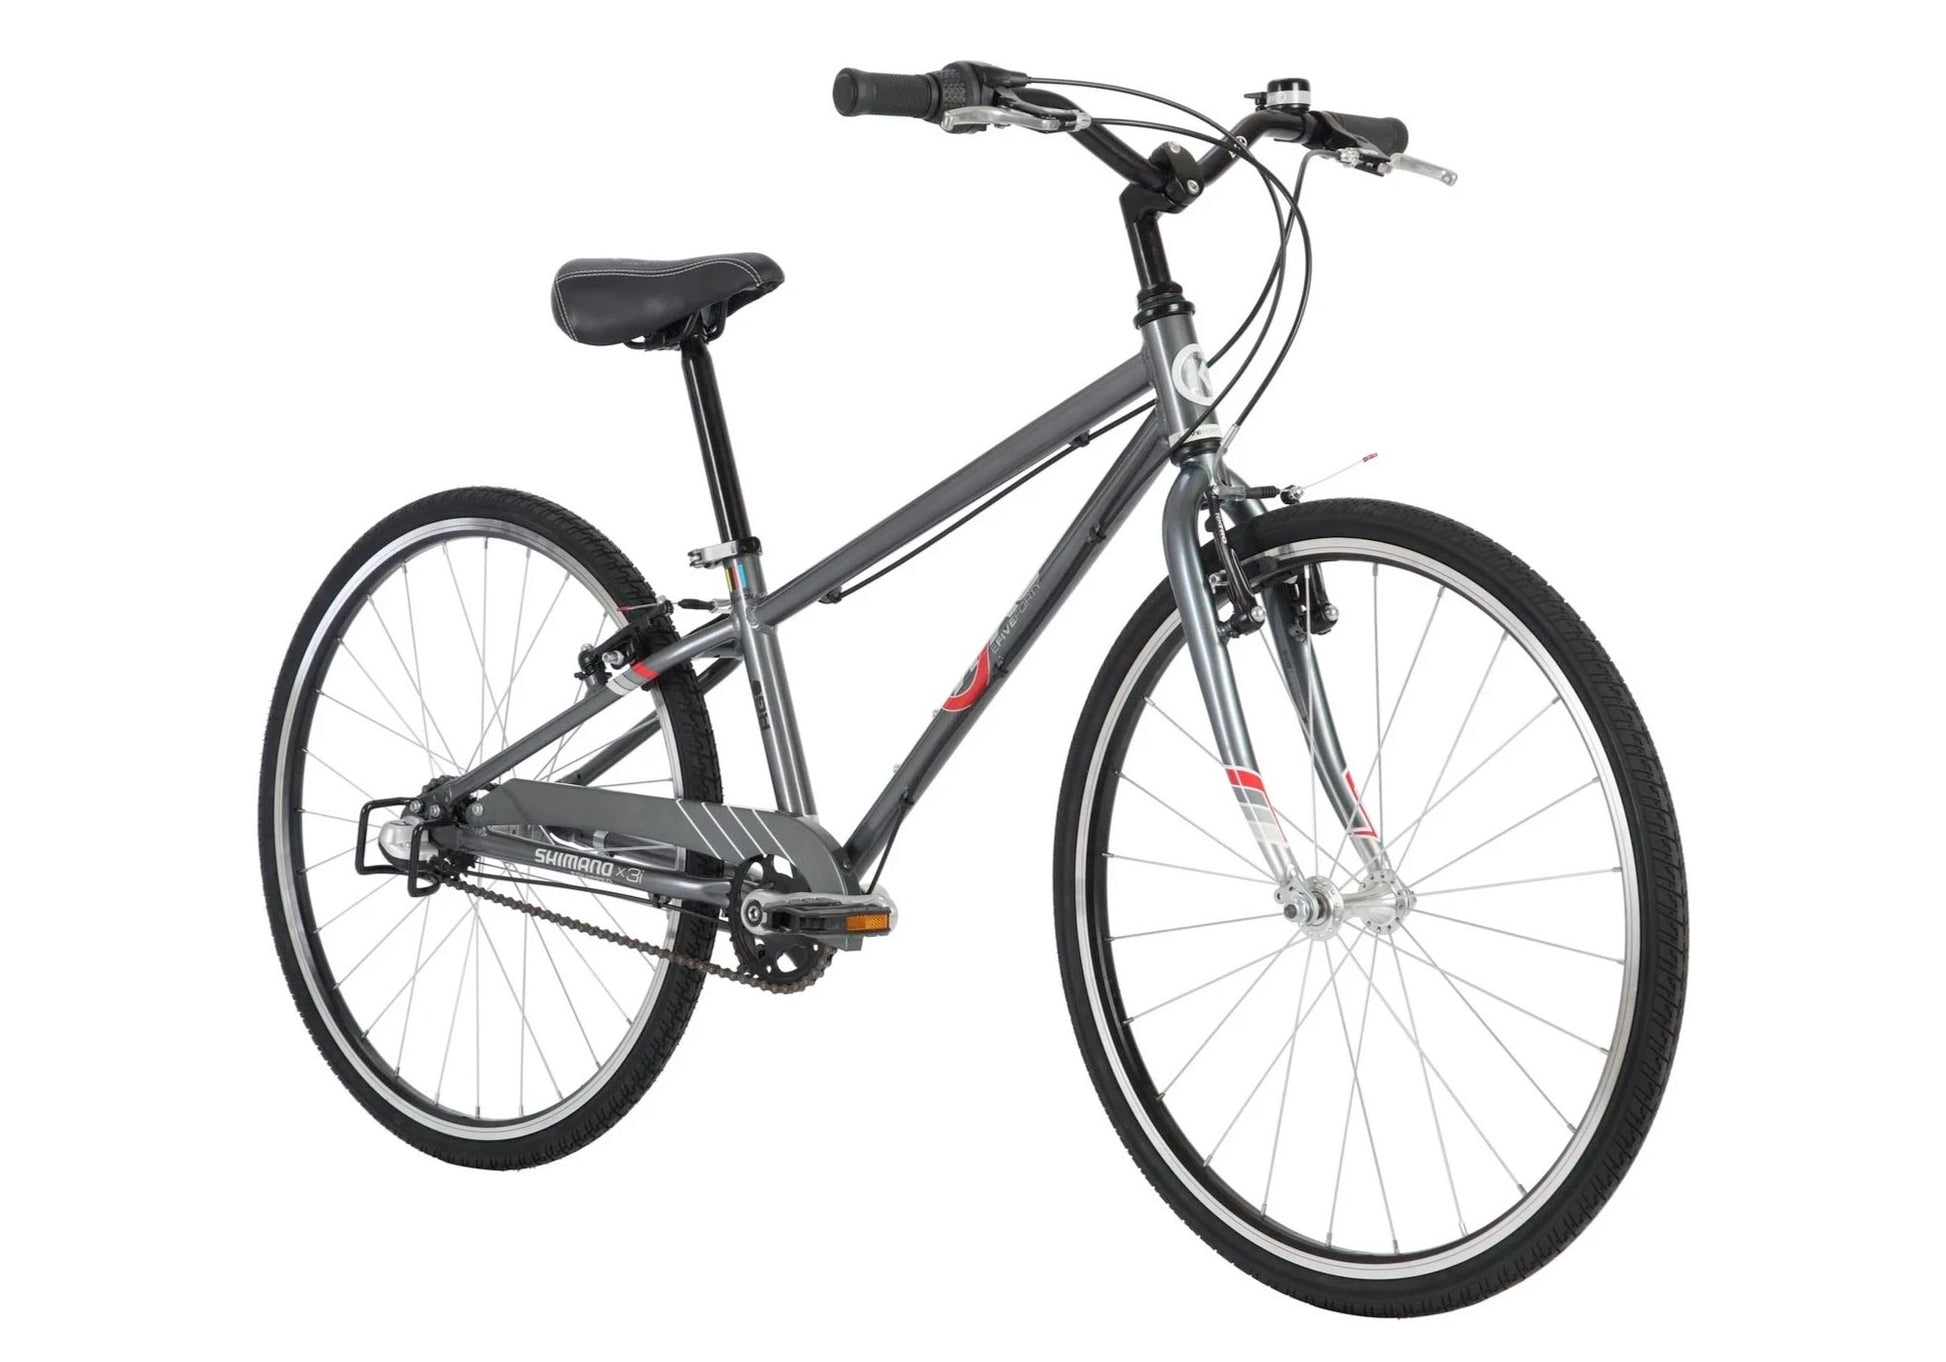 BYK E540 3 Speed Bike, Stealth Charcoal - Rider height: 130-160cm